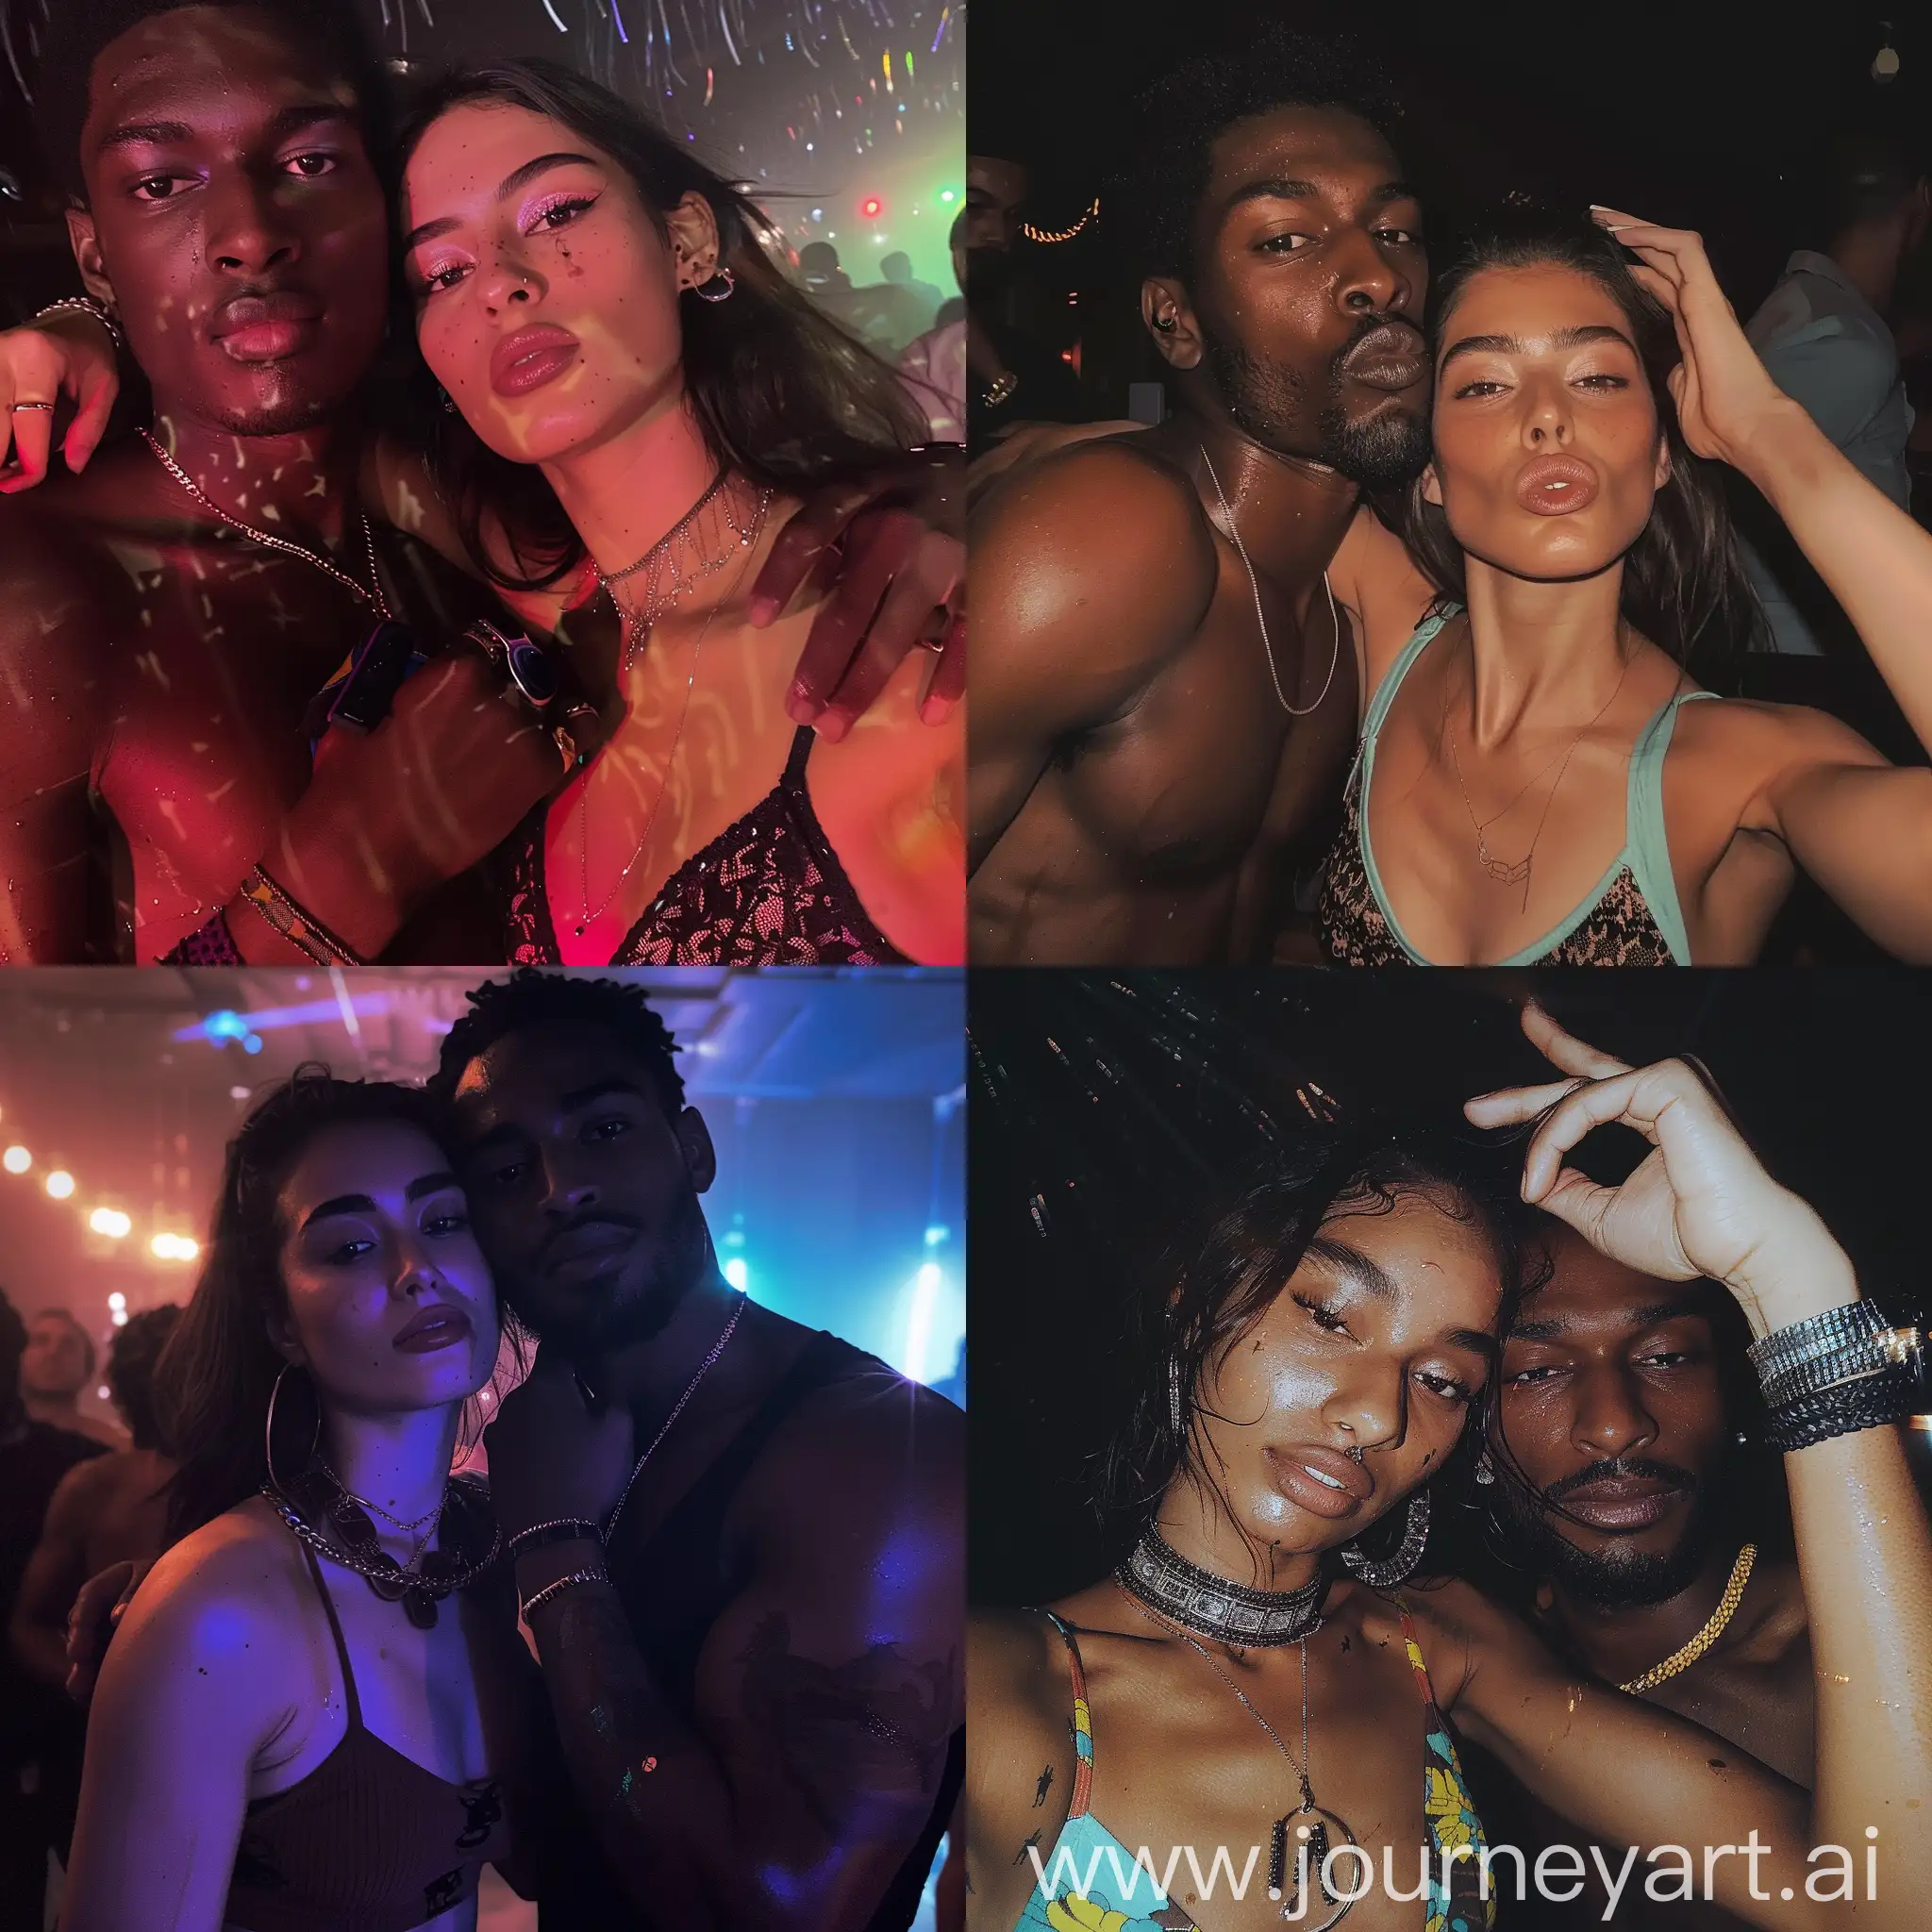 Iraqi-Woman-and-African-Man-Enjoying-Party-Club-Moment-with-Duck-Lips-Pose